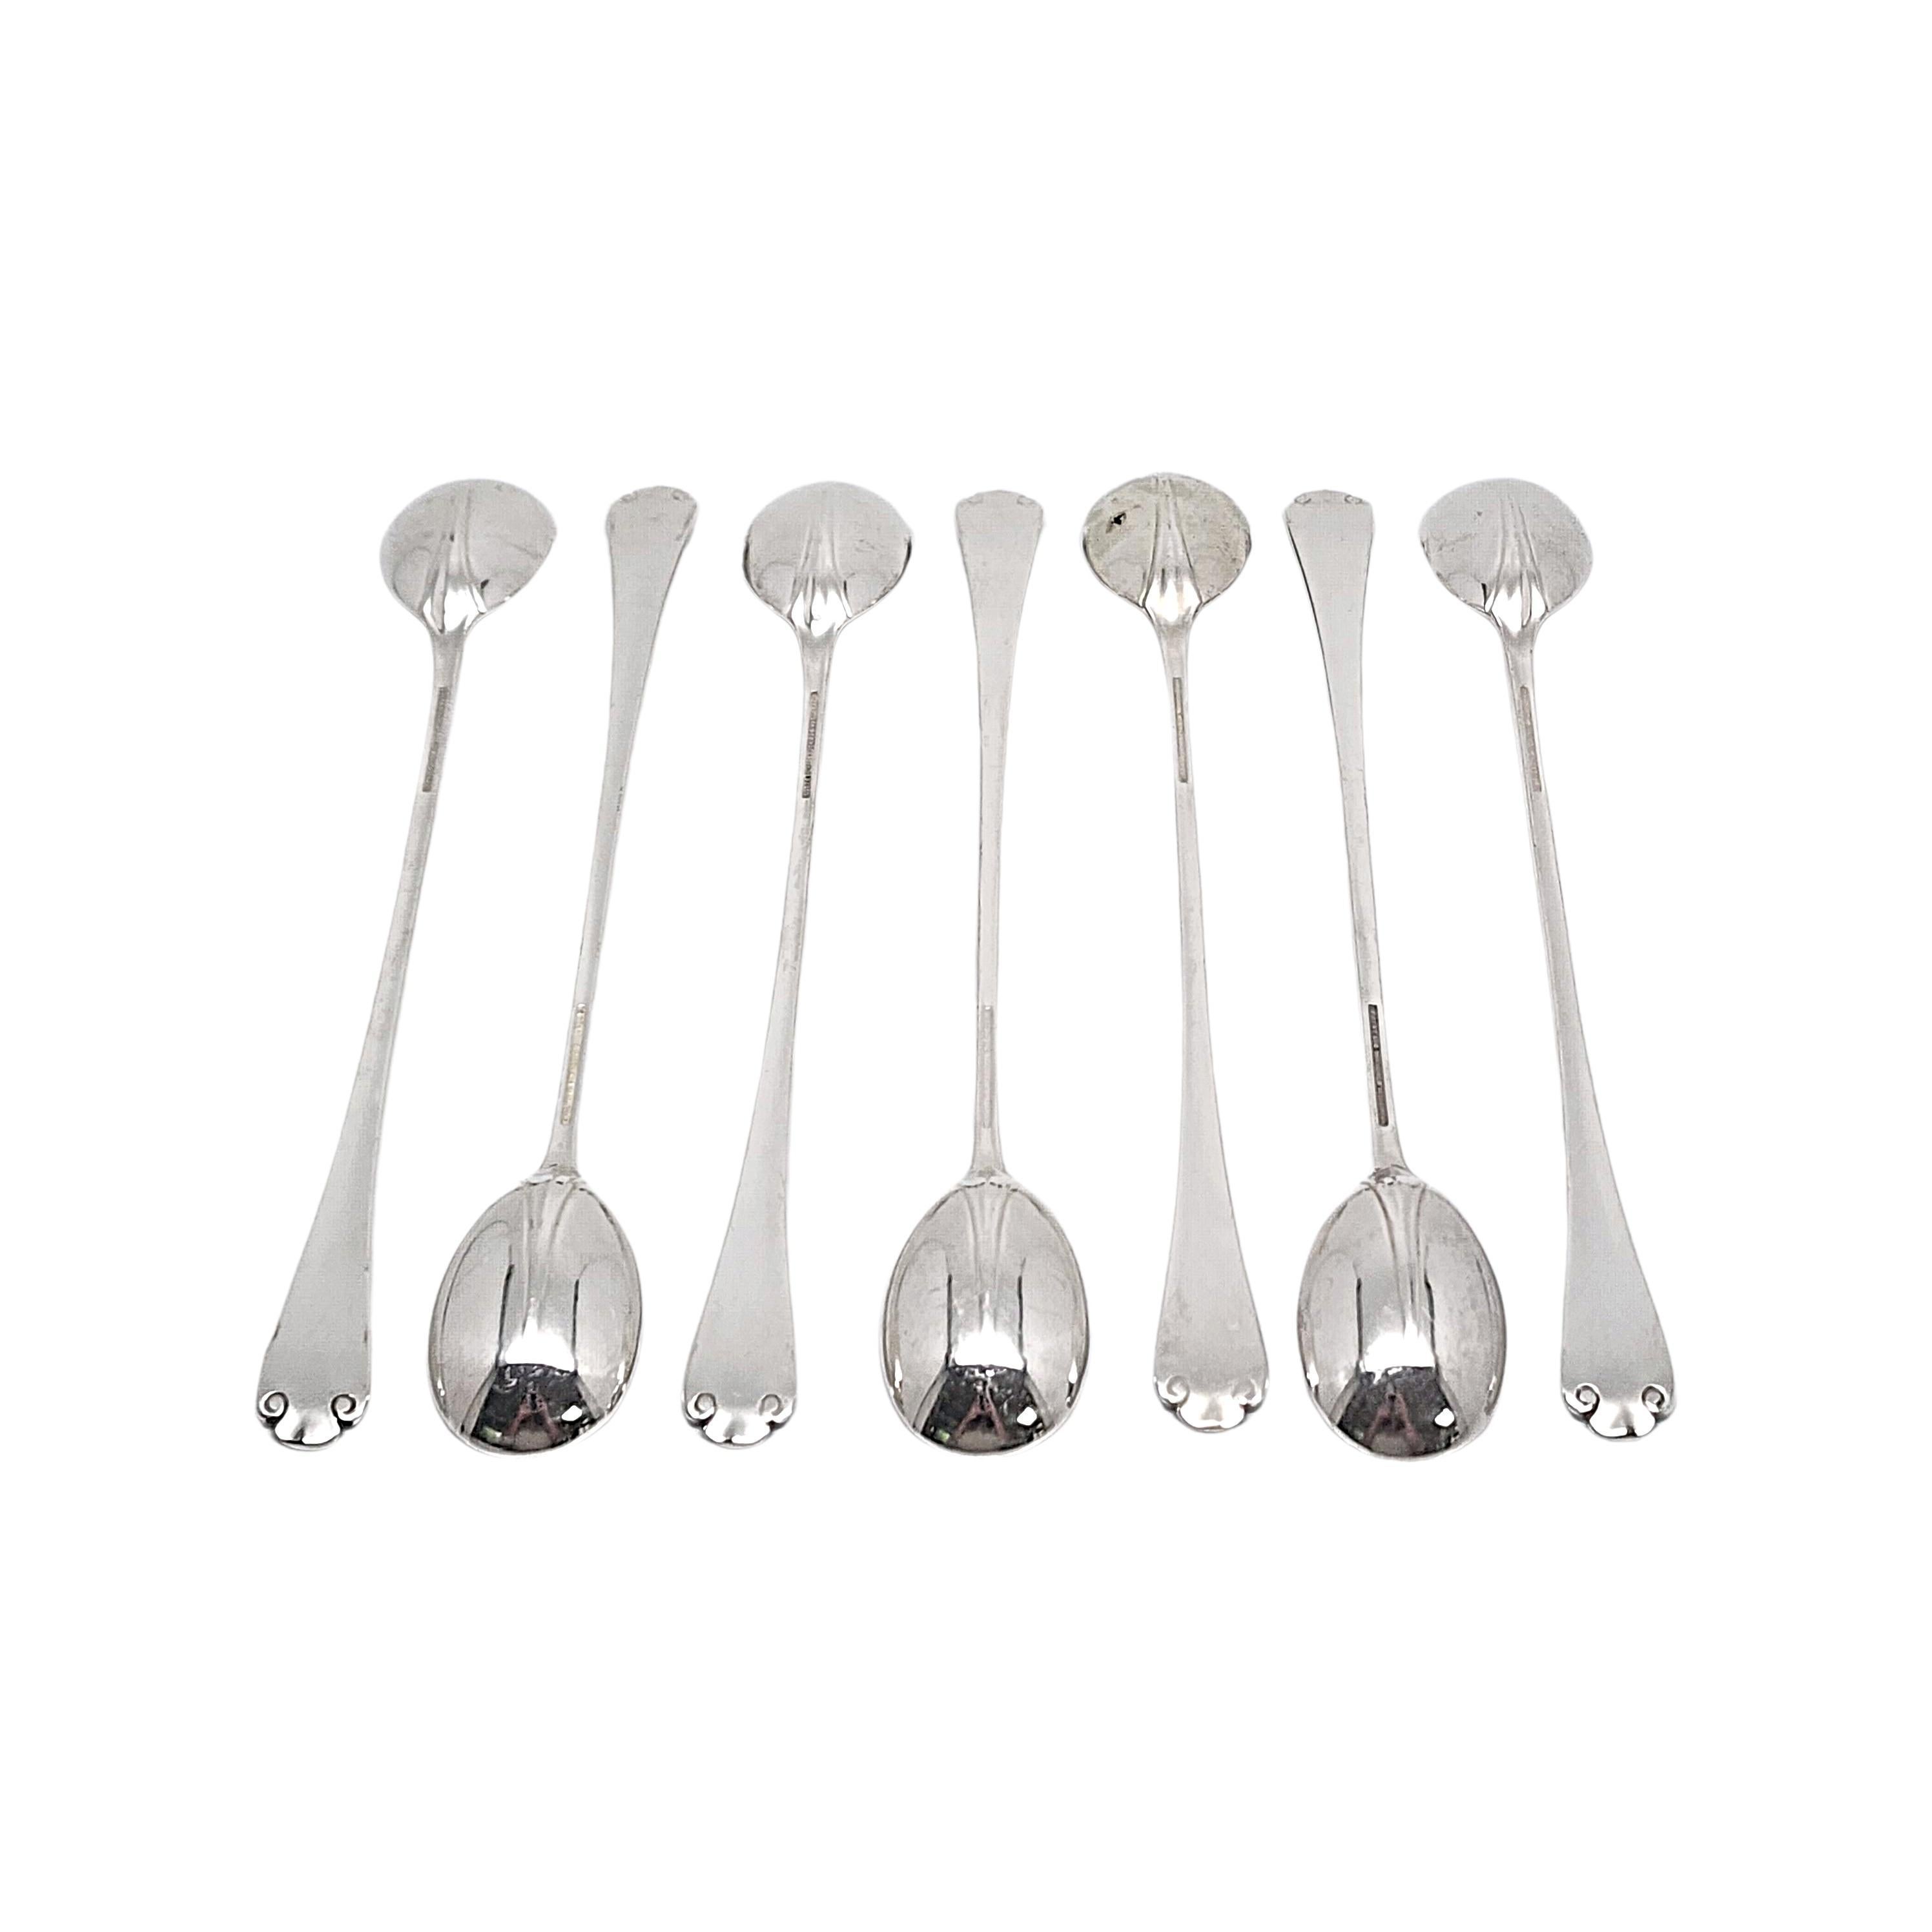 Set of 7 sterling silver iced tea spoons by Tiffany & Co in the Flemish pattern.

No monogram.

The Flemish pattern features a simple and elegant scroll design, making it a timeless classic that is still in demand today. Hallmarks date these pieces